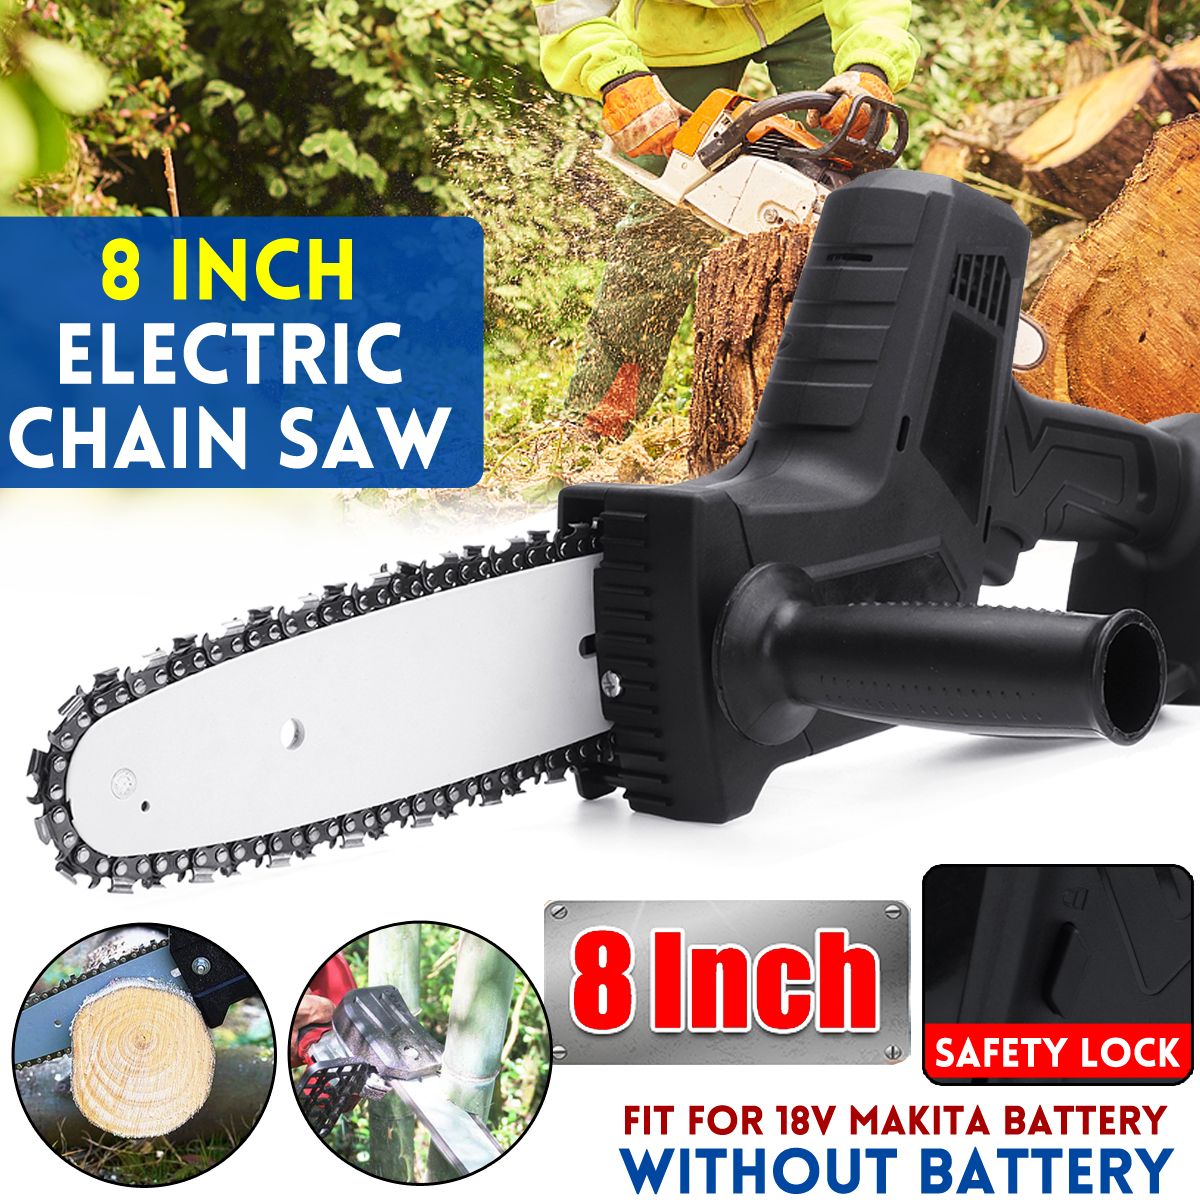 Portable-Cordless-Electric-Chain-Saw-8-Inch-Chainsaw-Woodworking-Power-Tool-For-Makita-18V-Battery-1746024